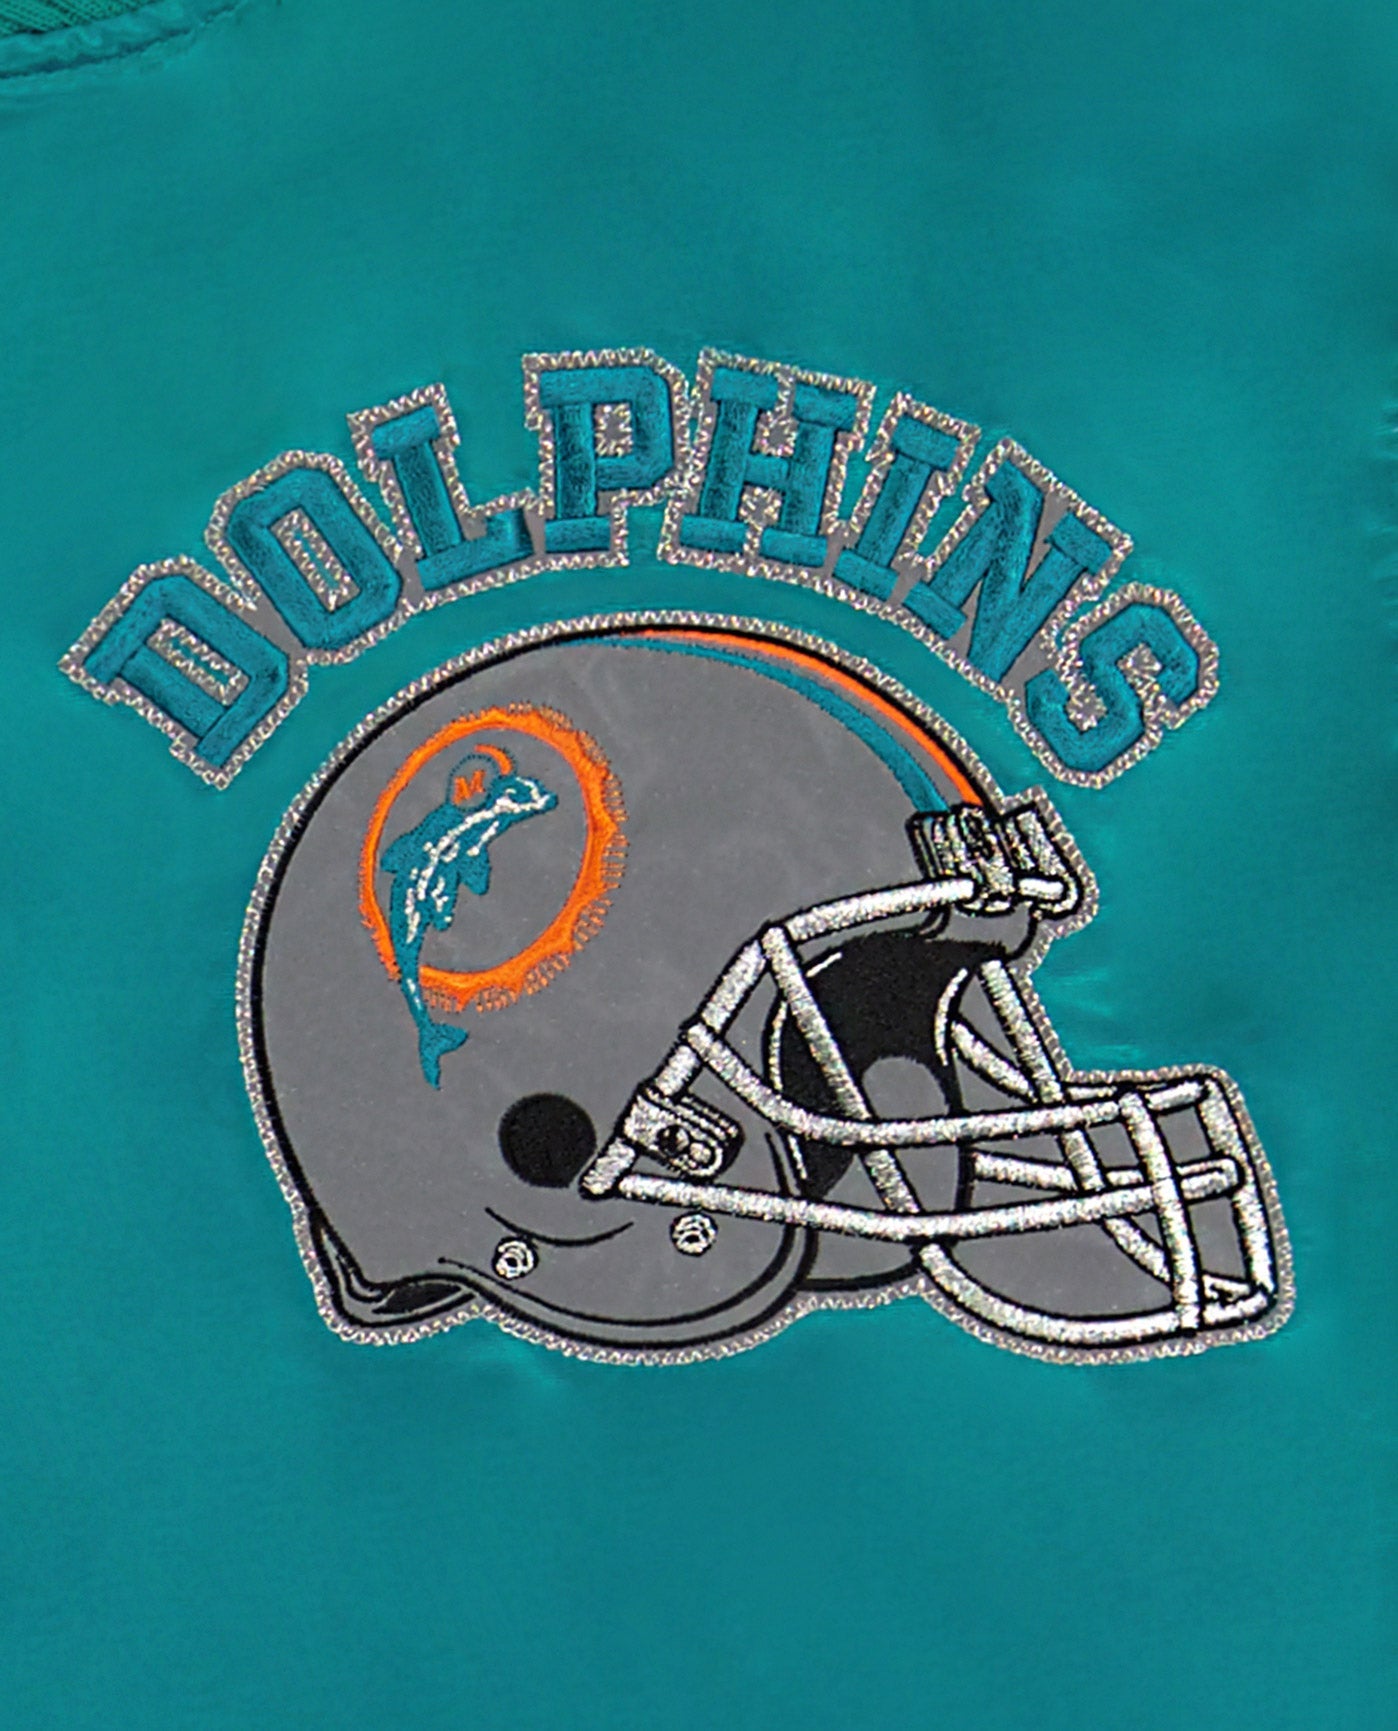 Saw someone make a mock-up for an aqua helmet uniform, decided to try  something else : r/miamidolphins